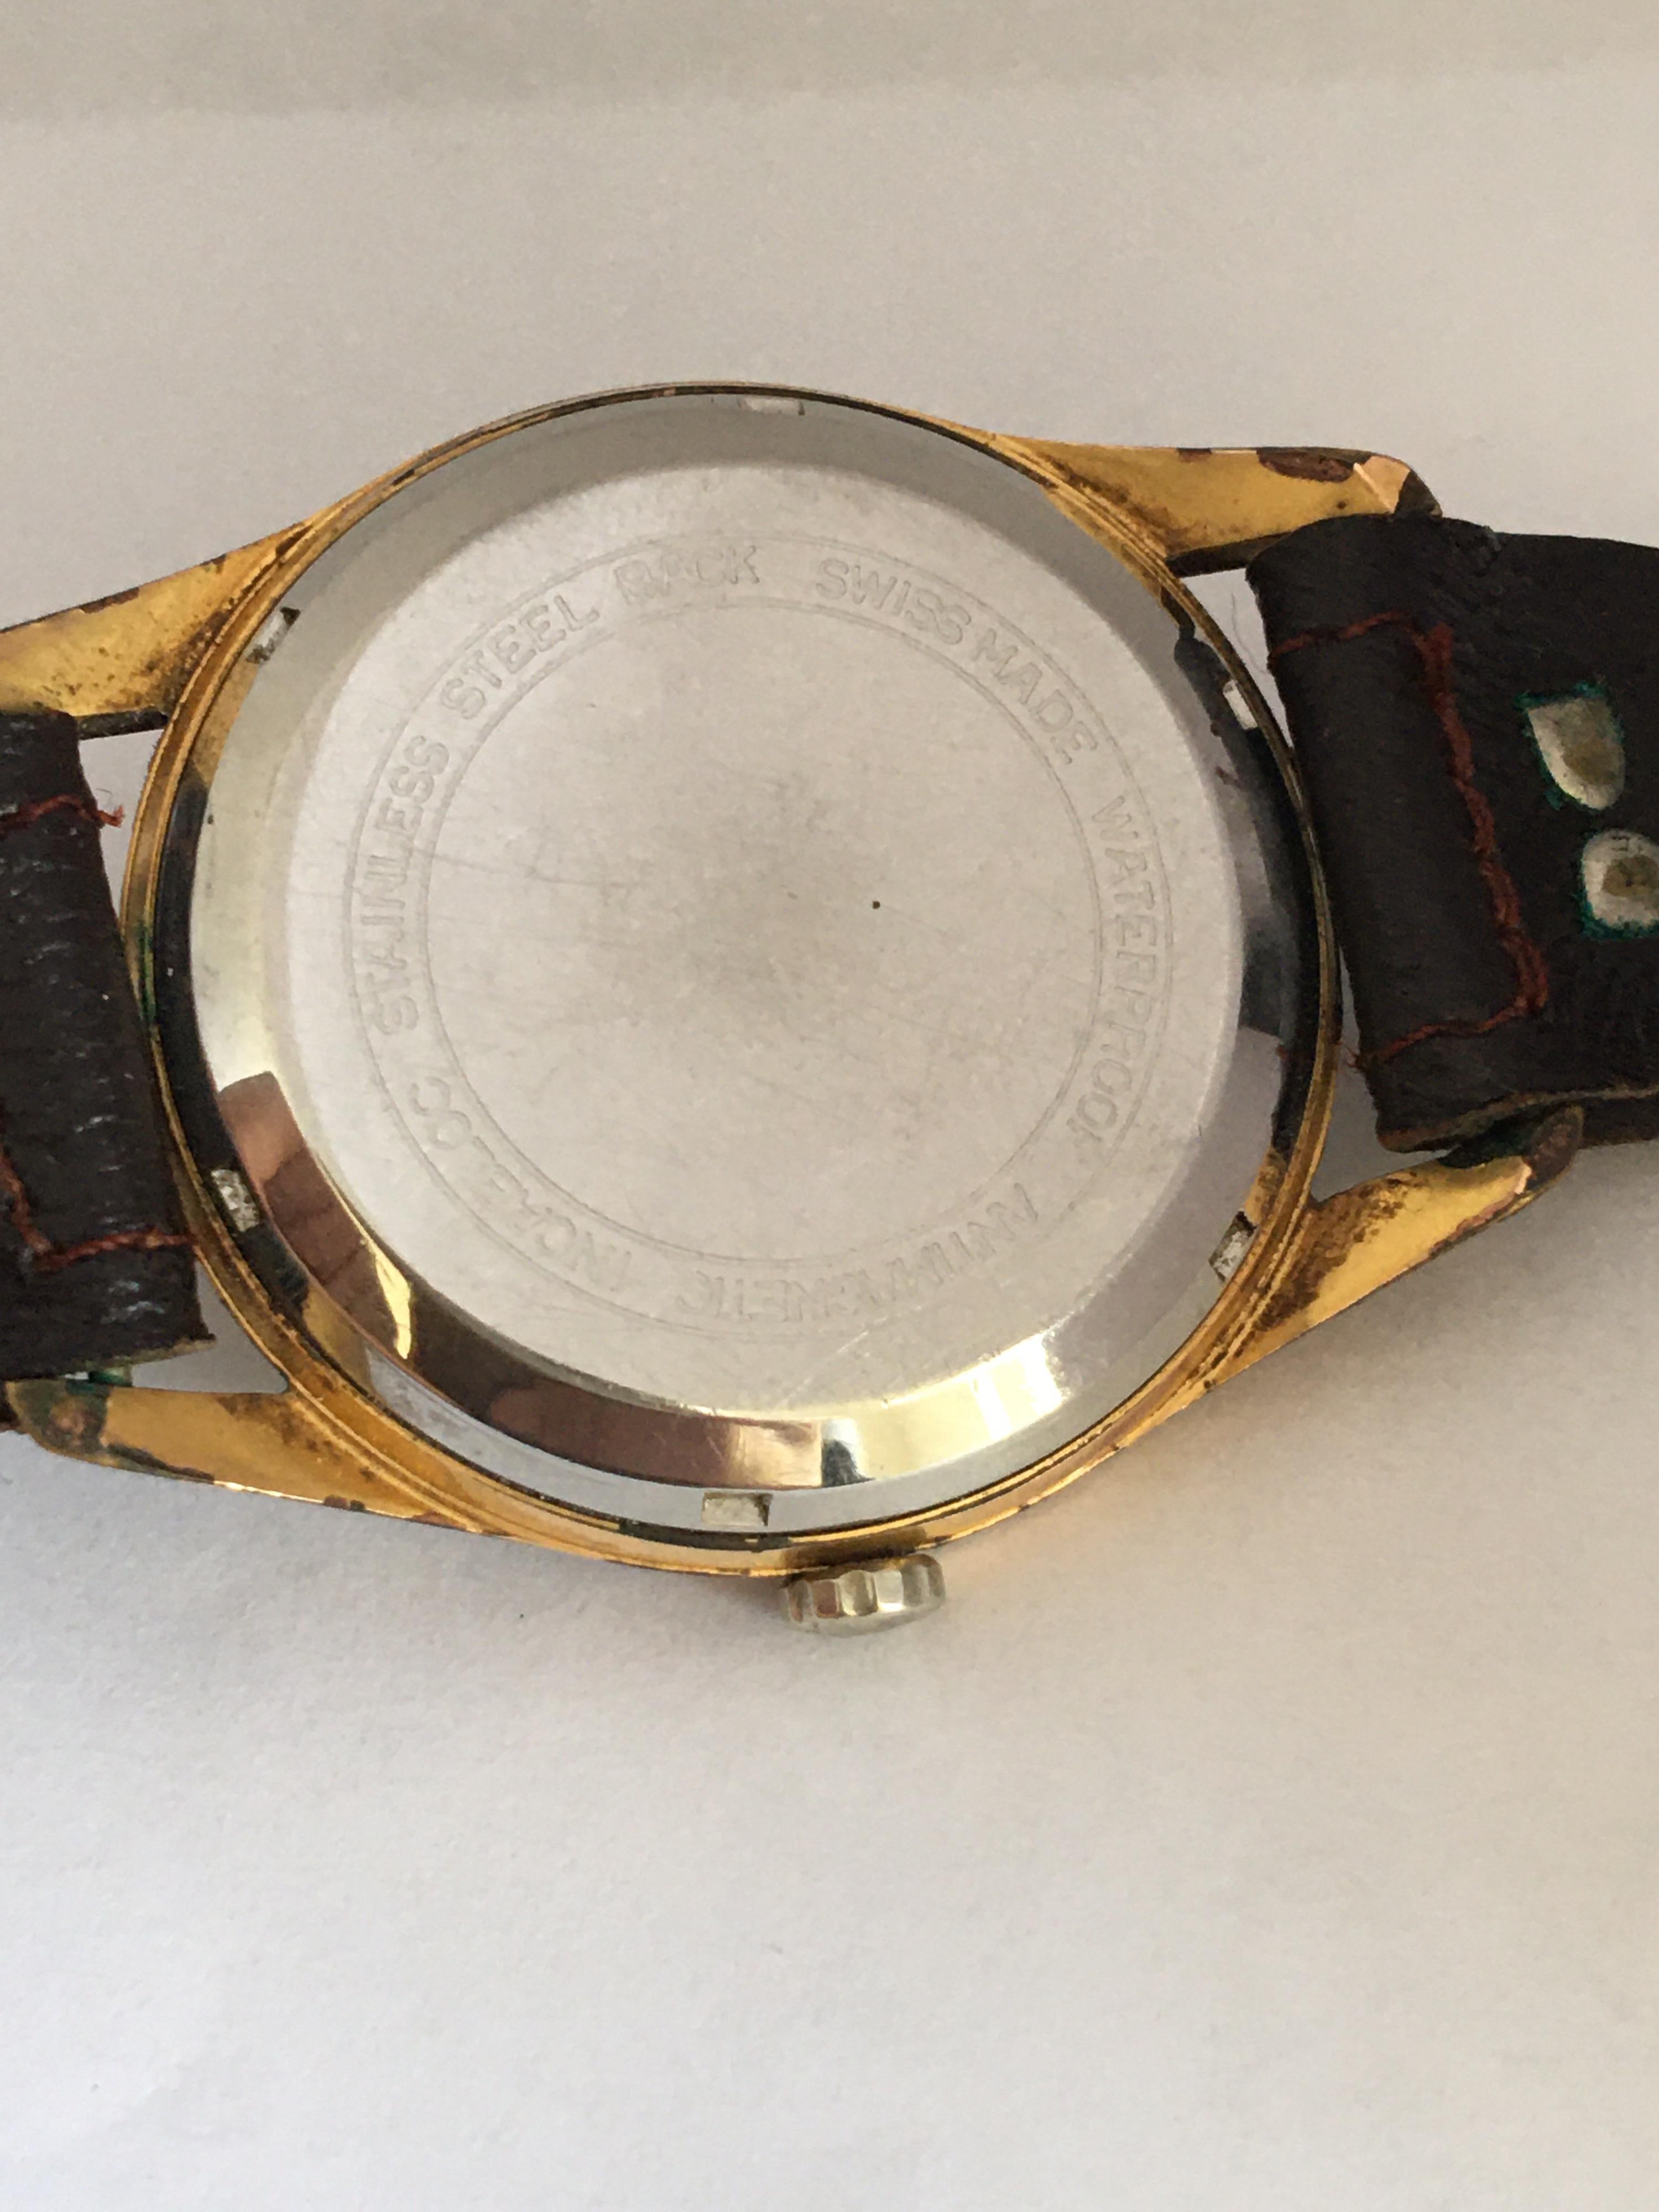 Vintage 1960s Gold-Plated Cap and Stainless Steel Back Swiss Automatic Watch For Sale 1